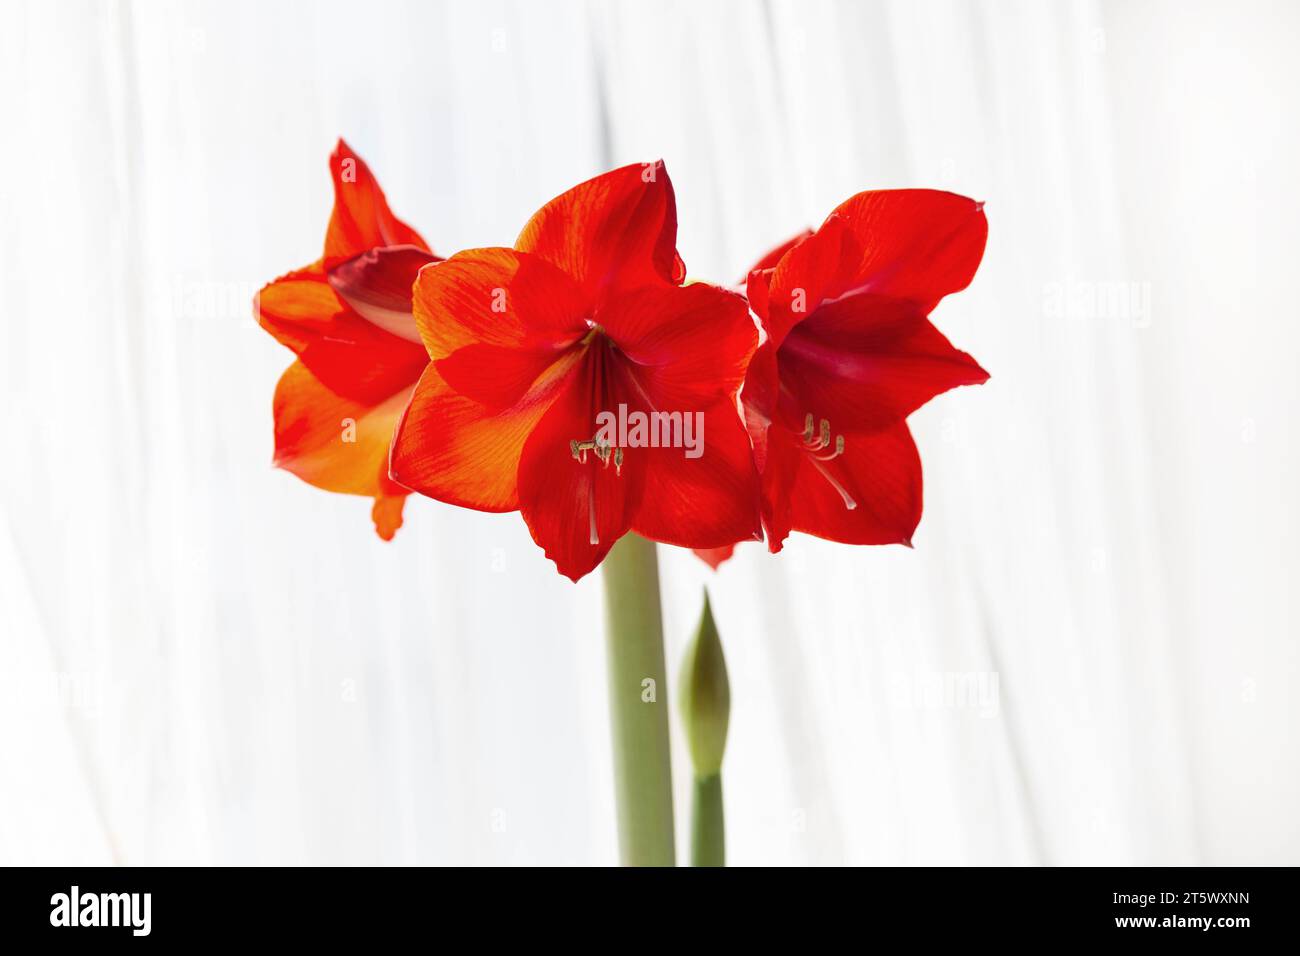 Beautiful red amaryllis flowers in bloom Stock Photo